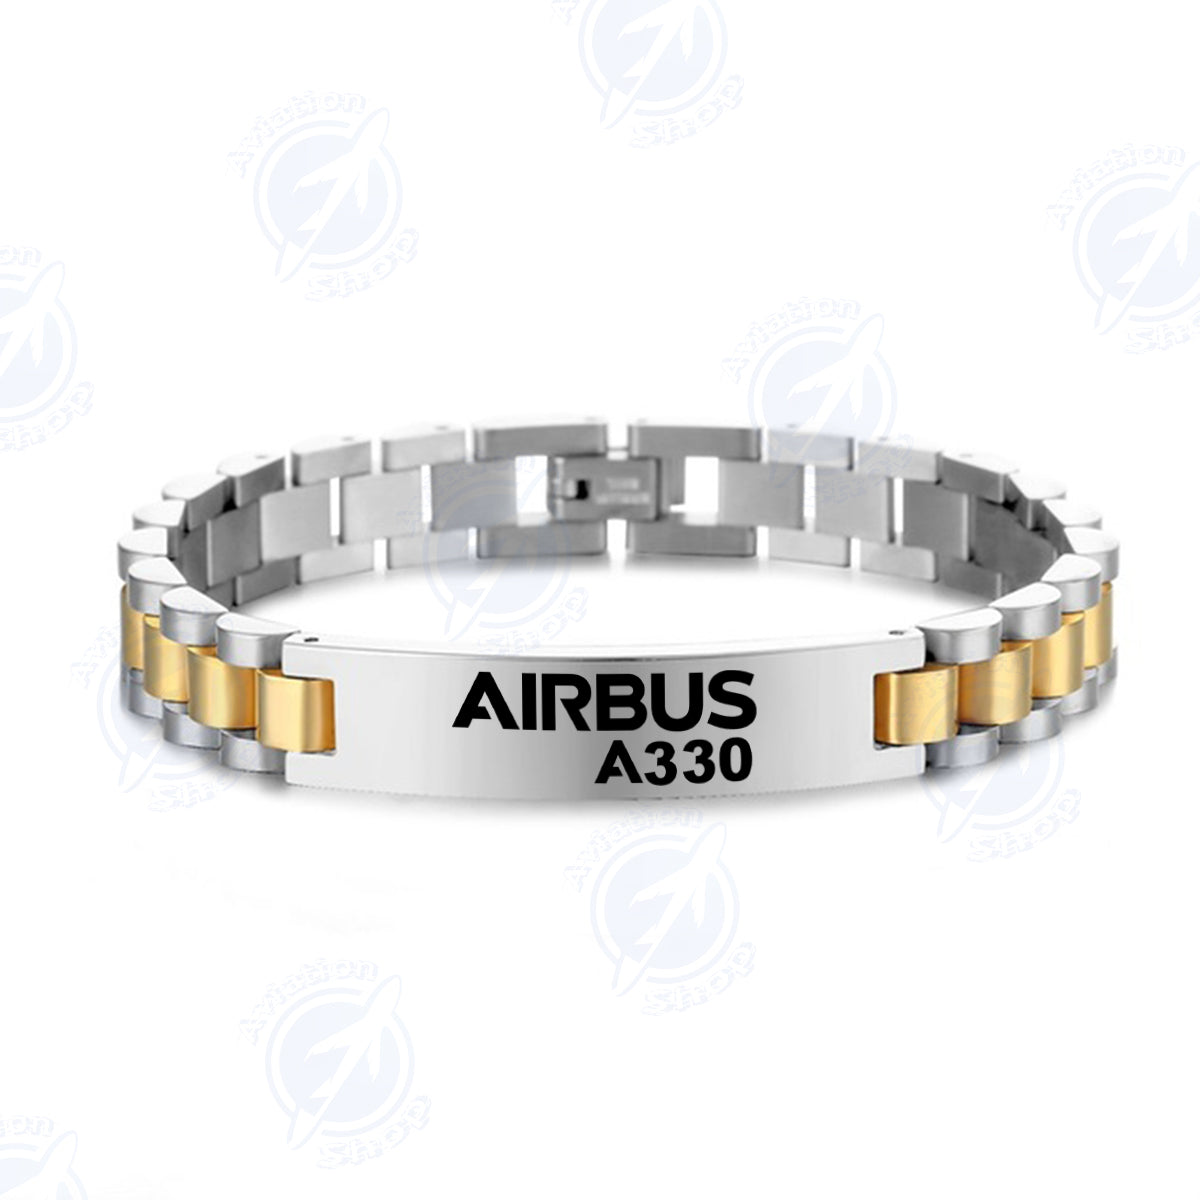 Airbus A330 & Text Designed Stainless Steel Chain Bracelets